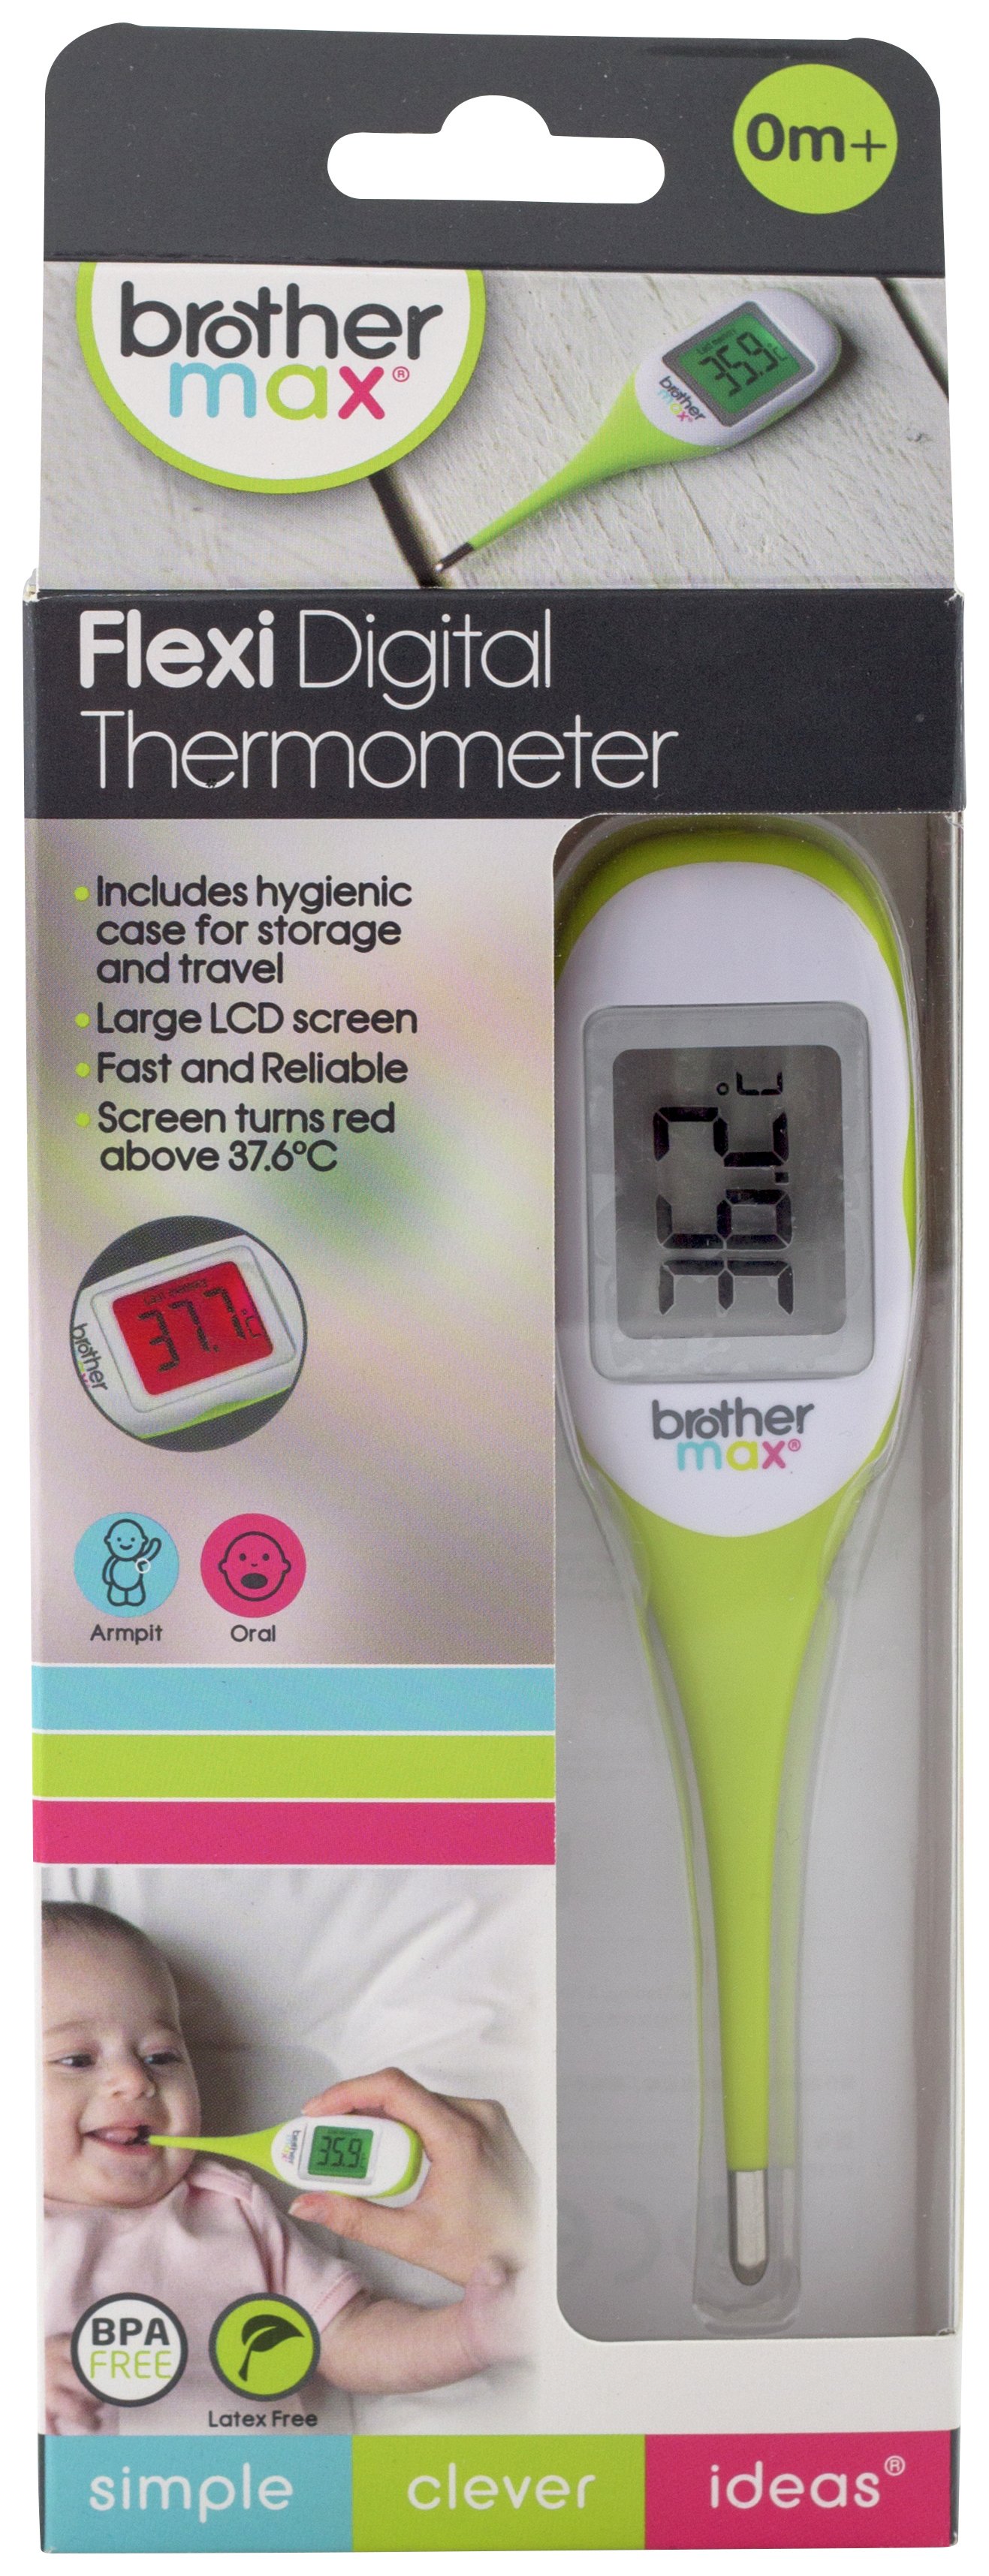 Brother Max Flexi Thermometer review